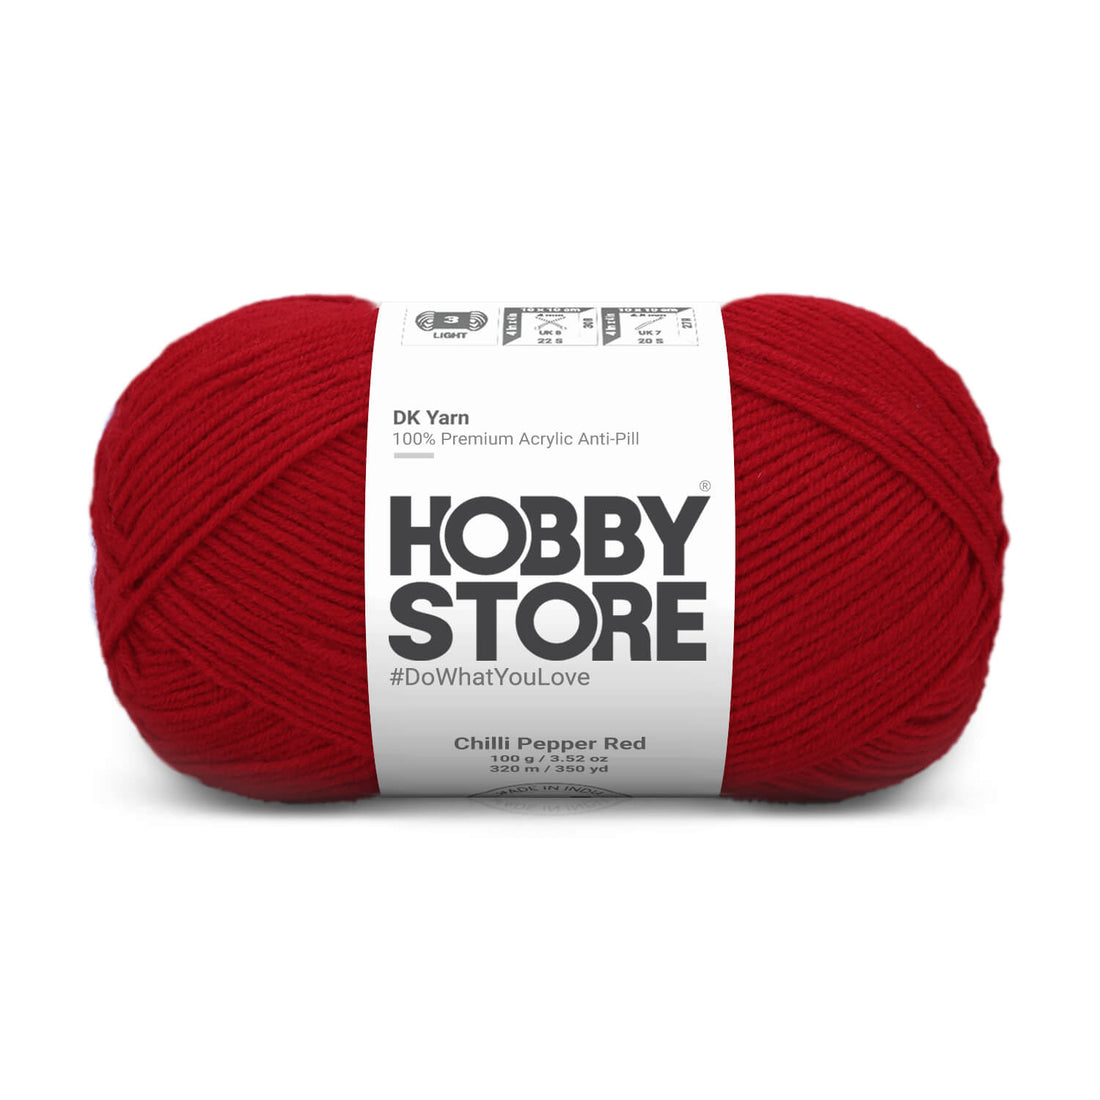 DK Anti-Pill Yarn by Hobby Store - Chilli Pepper Red 5003